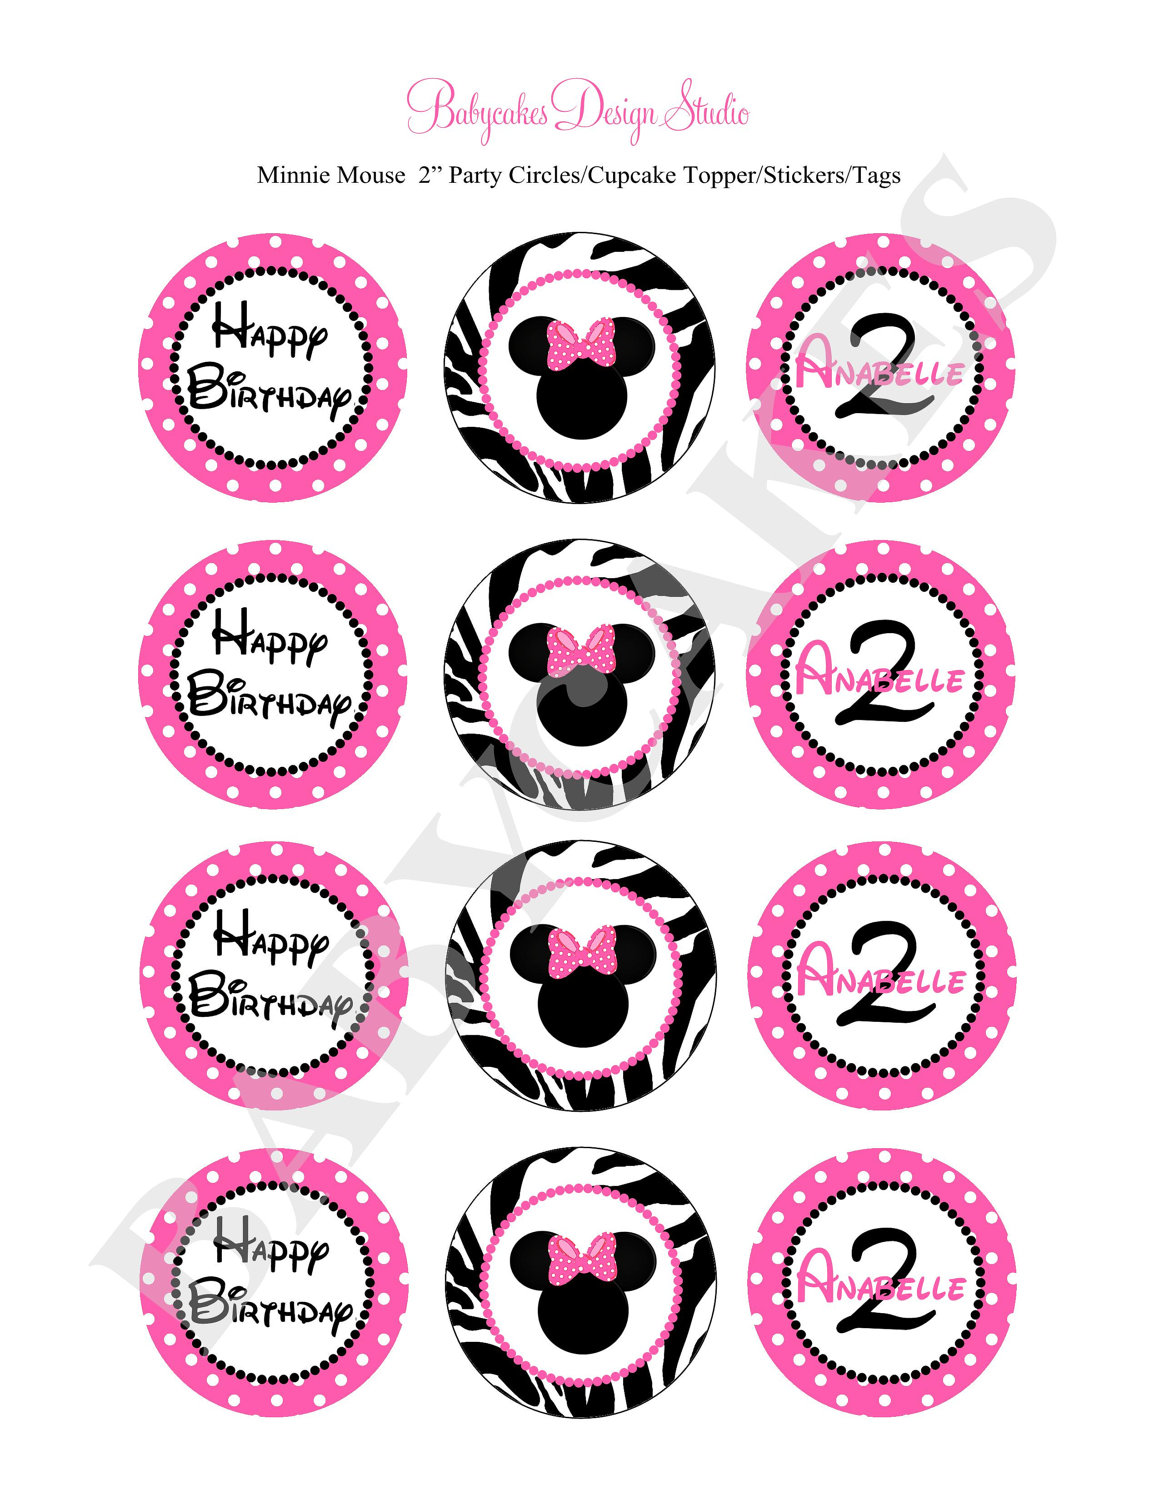 Minnie Mouse Invitations Baby Shower   Clipart Panda   Free Clipart